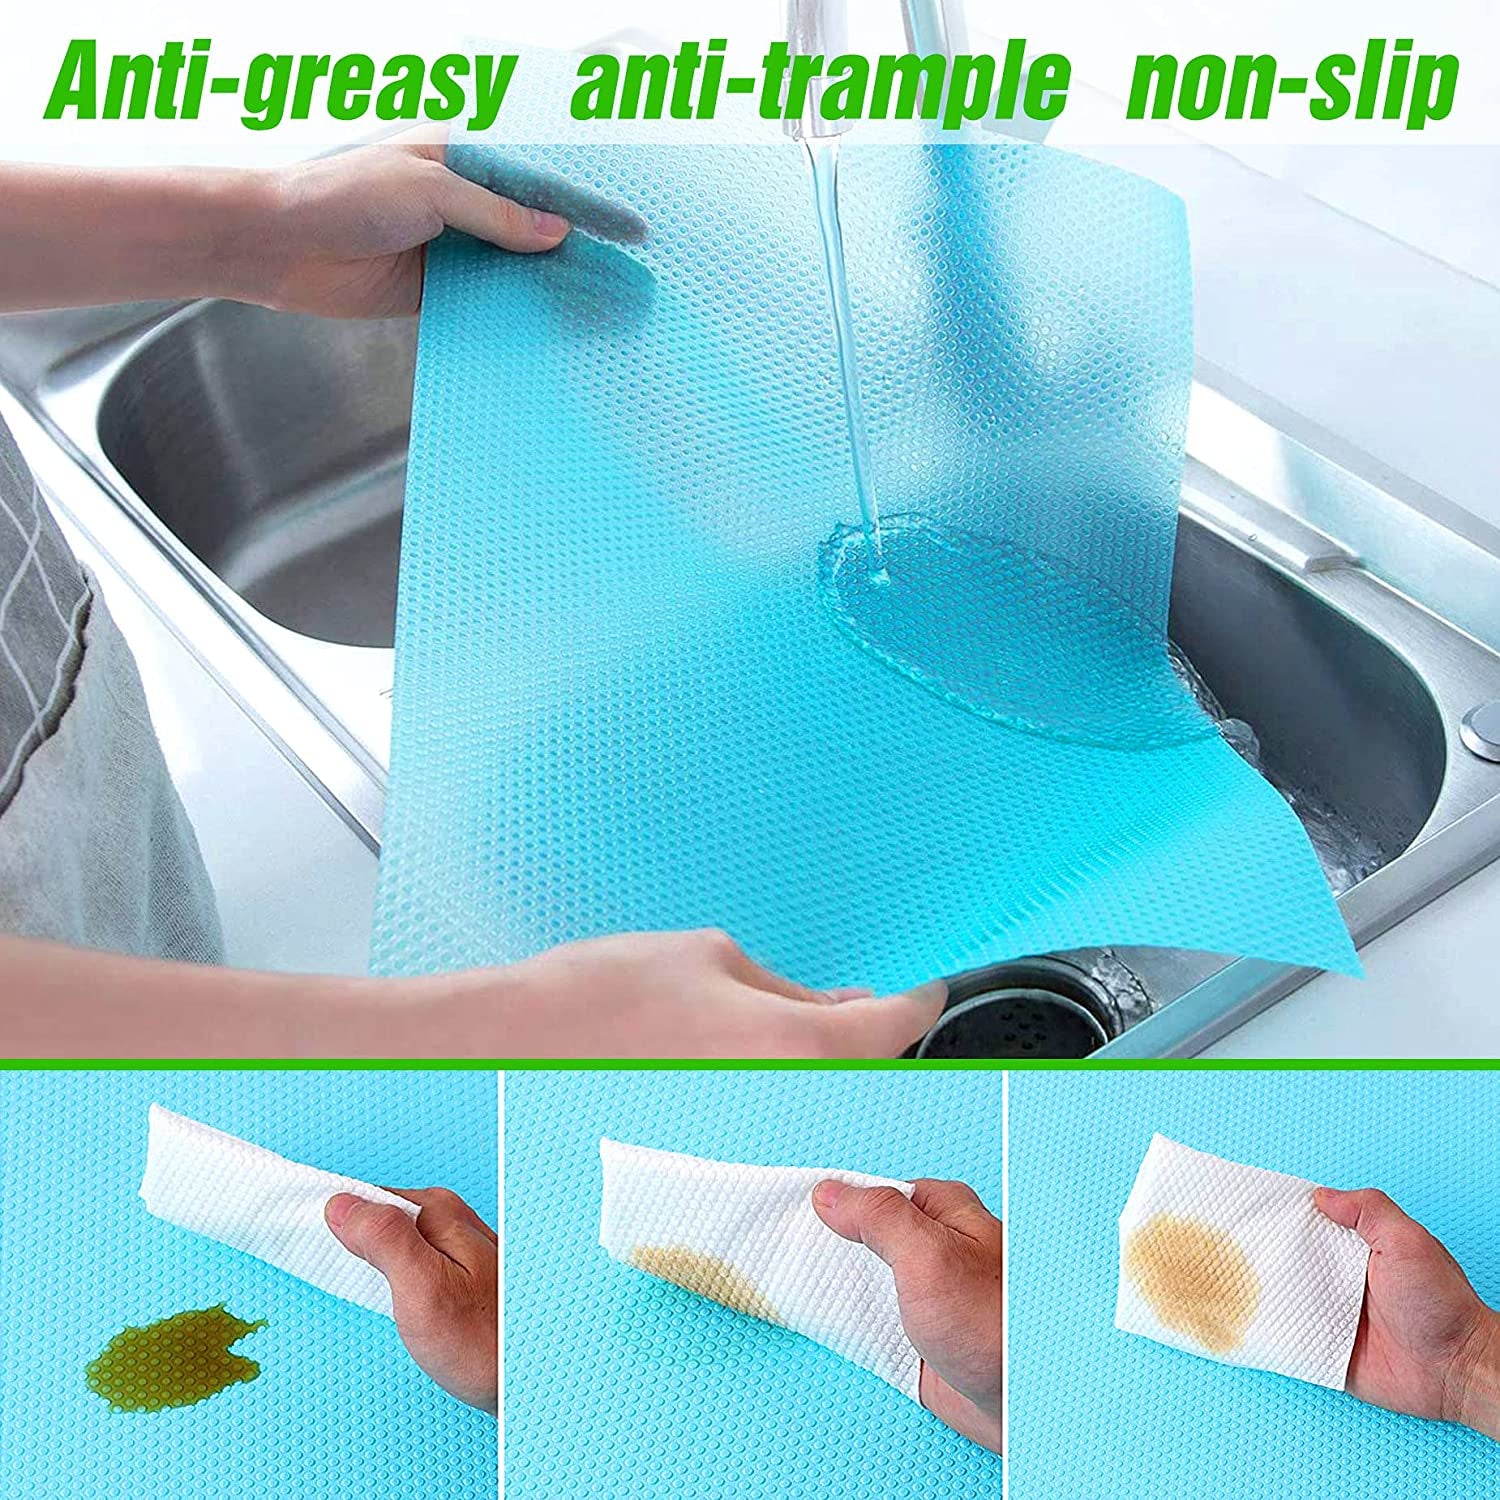 8 Pcs Refrigerator Mats, Waterproof Non-Slip EVA Refrigerator Liner Pads, Can Be Cut Washable Fridge Mat, Also Great for Drawers Shelves Cabinets Storage Kitchen and Placemats